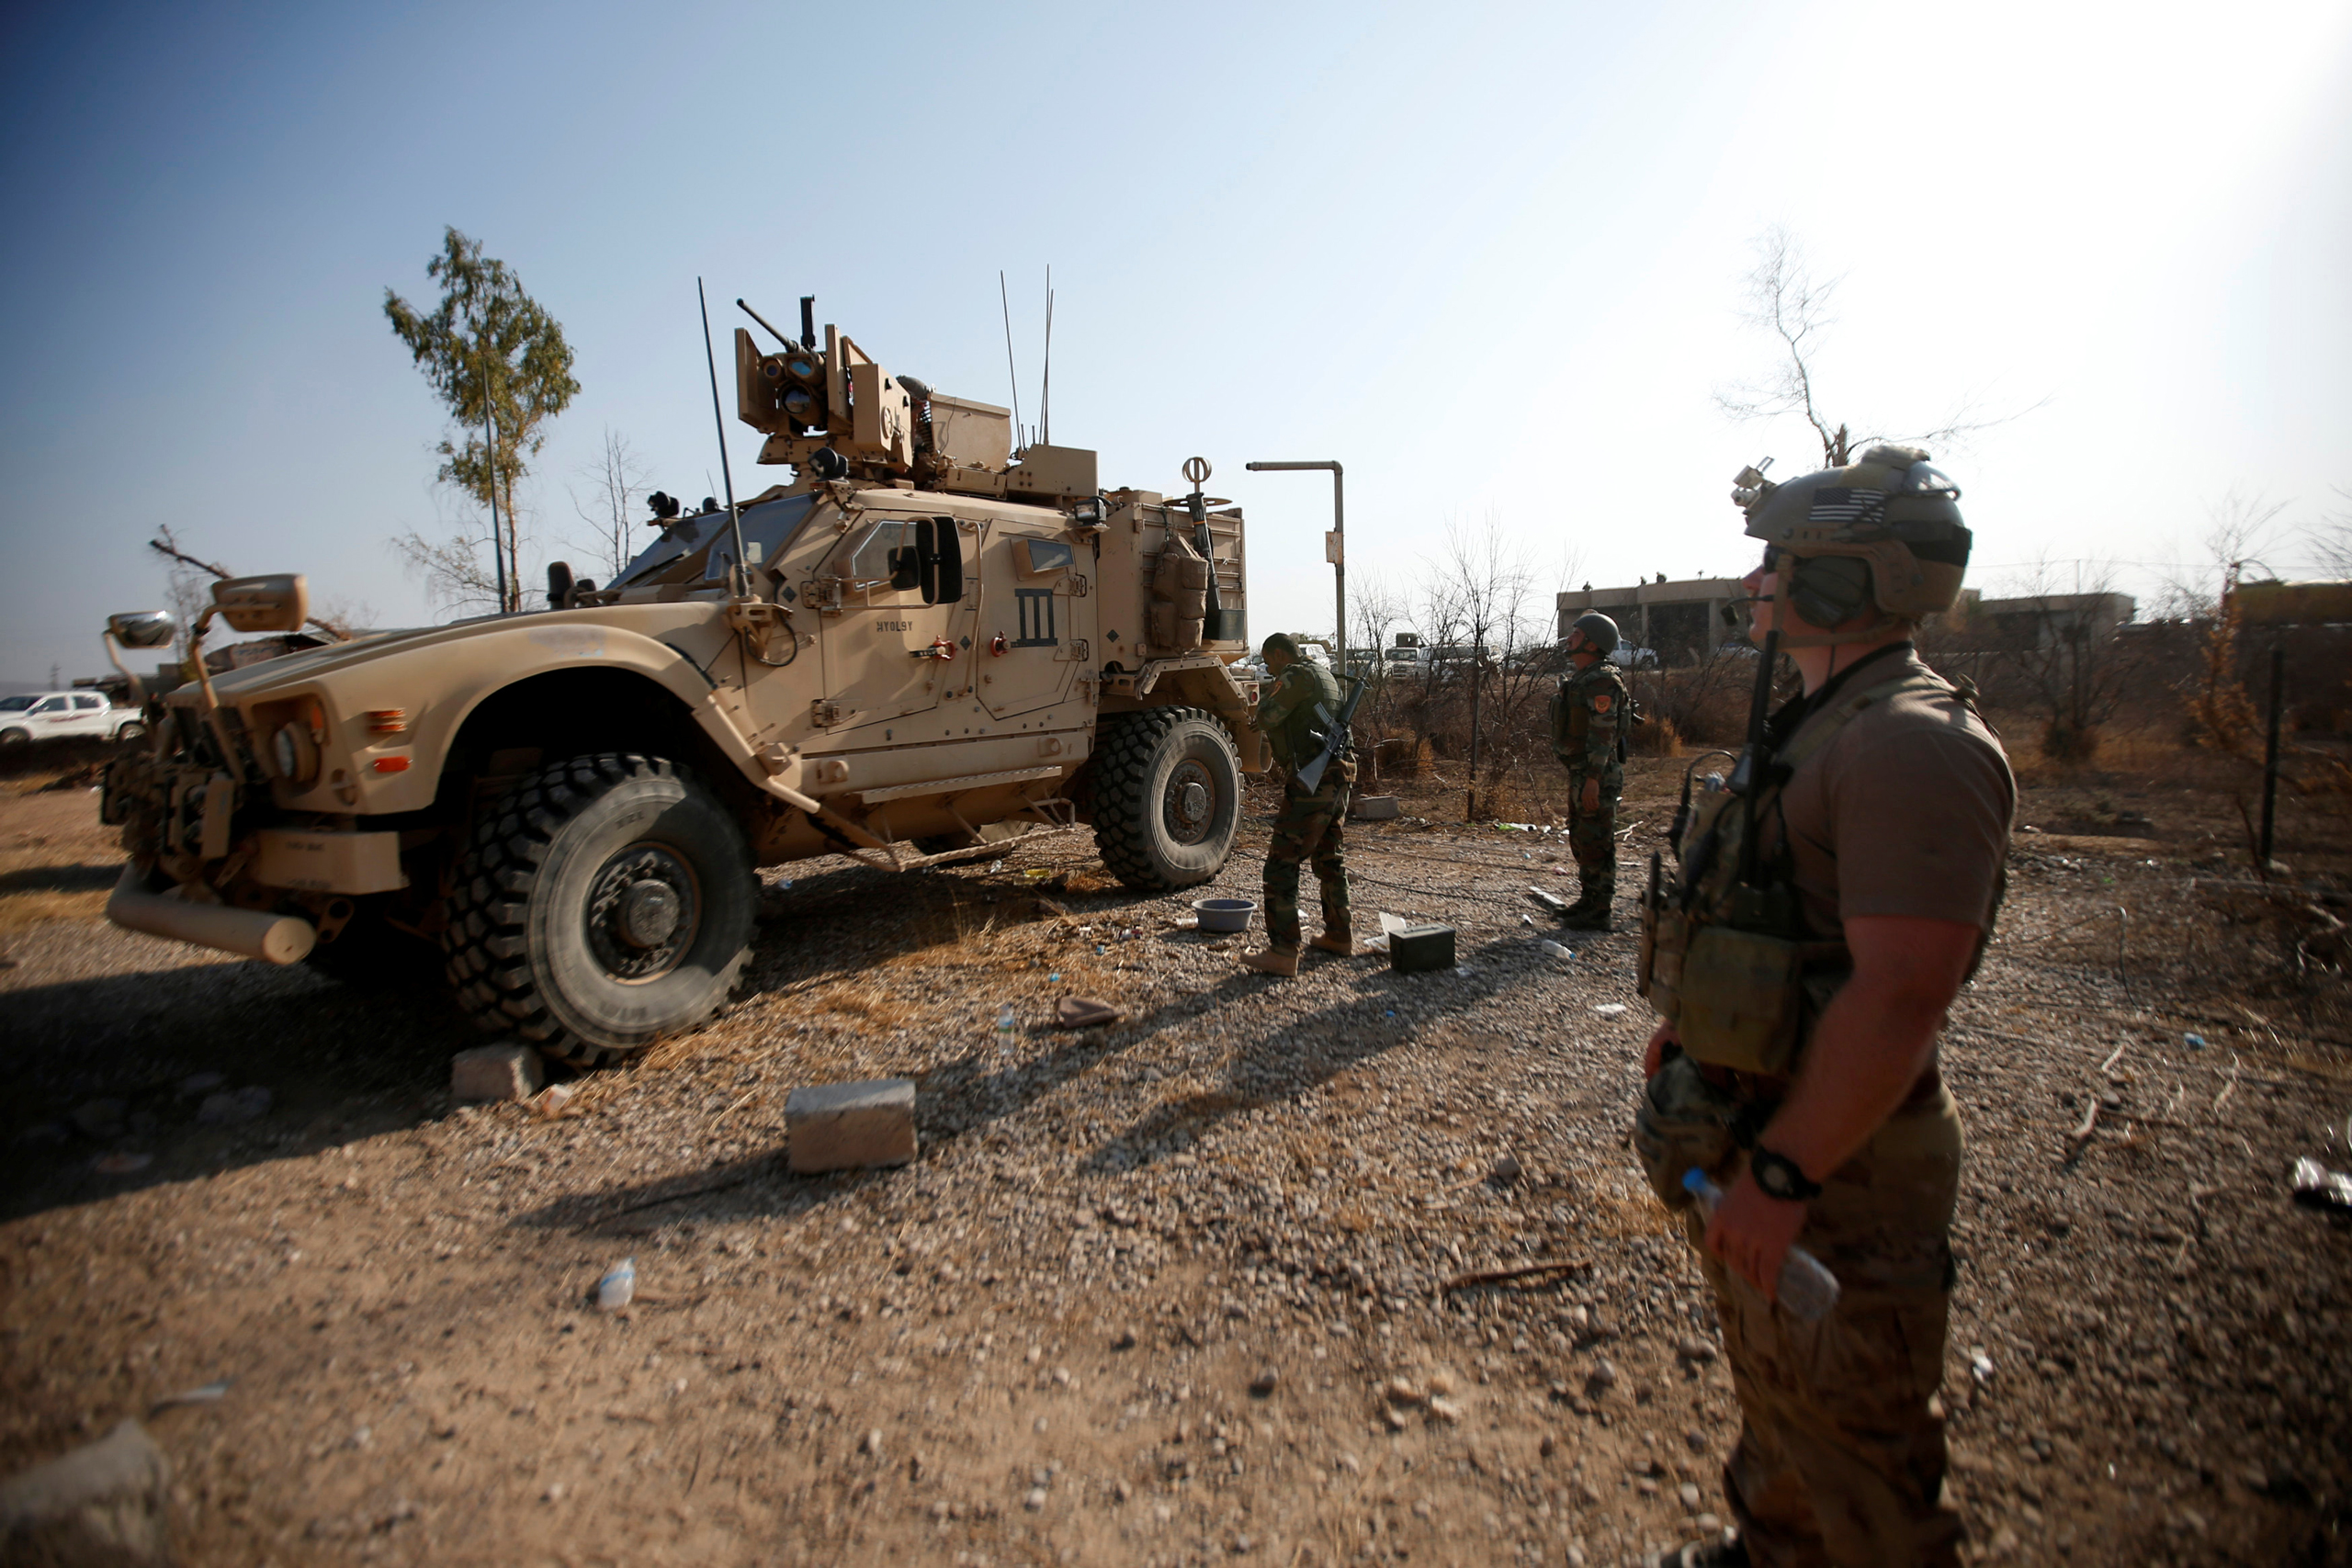 U.S. military vehicles are seen during an operation to attack Islamic State militants in the town of Bashiqa, east of Mosul, Iraq, on Nov. 7, 2016. (Azad Lashkari—Reuters)